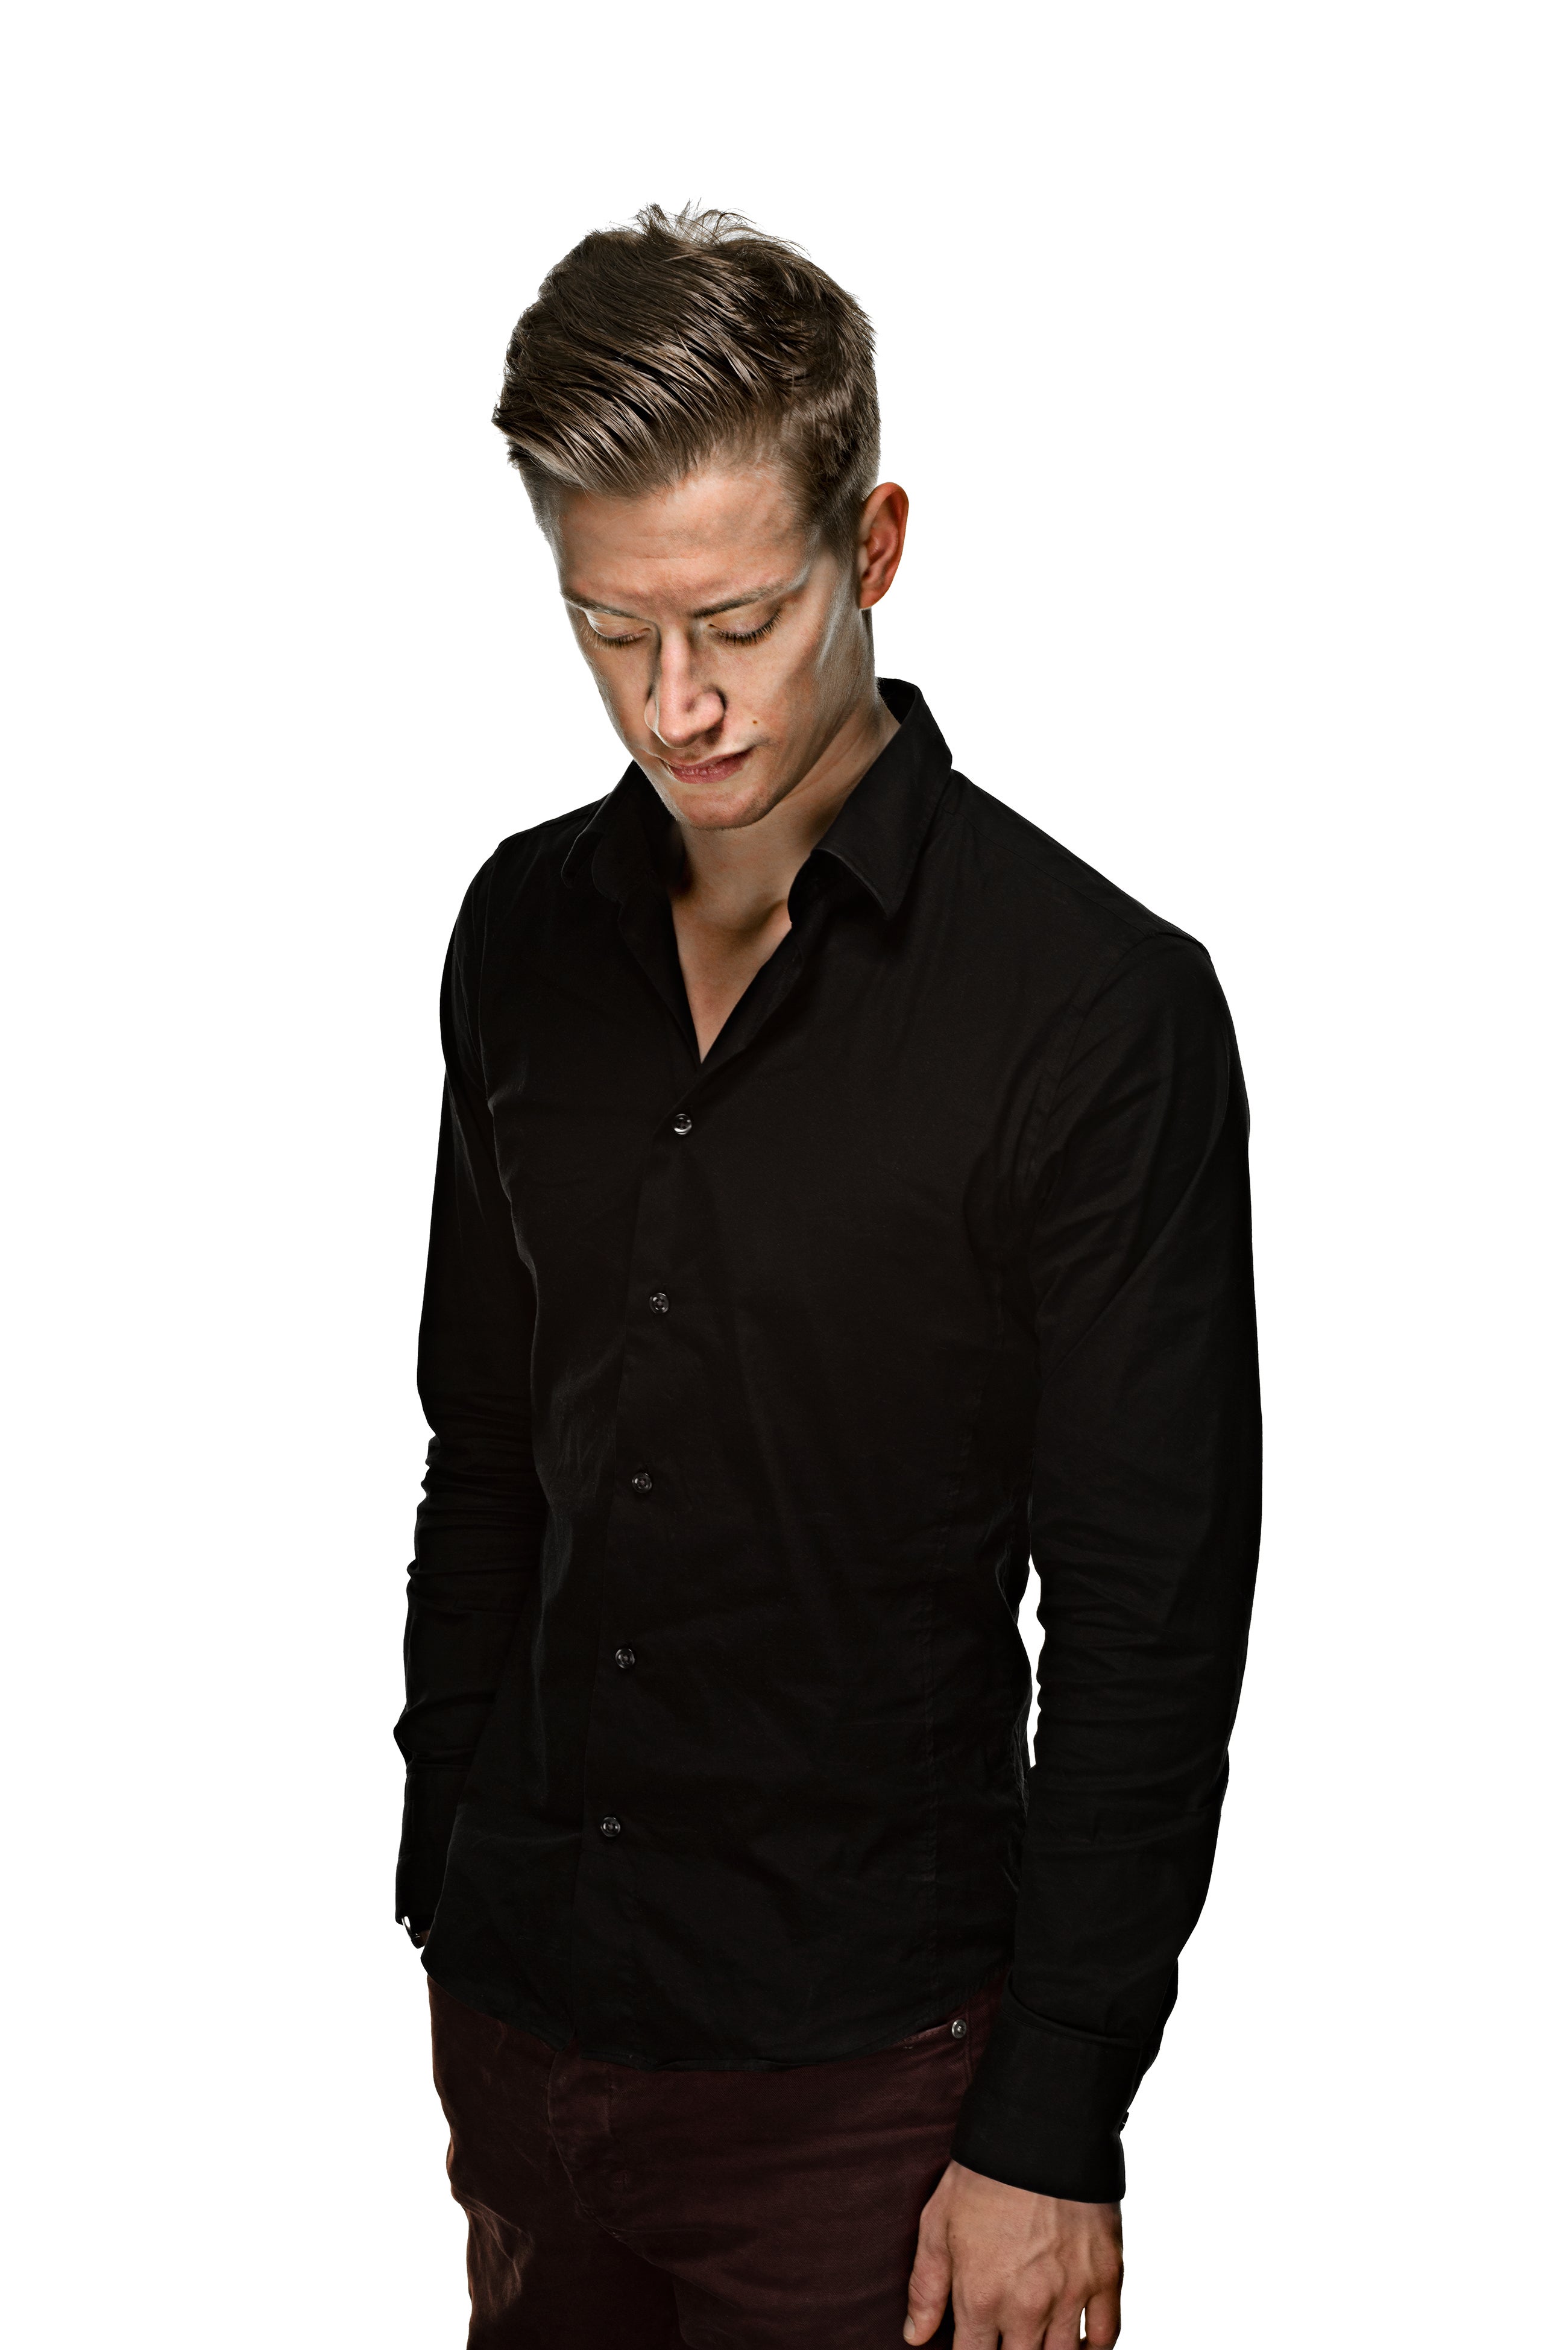 Daniel Sloss: Can't Event Title Pic